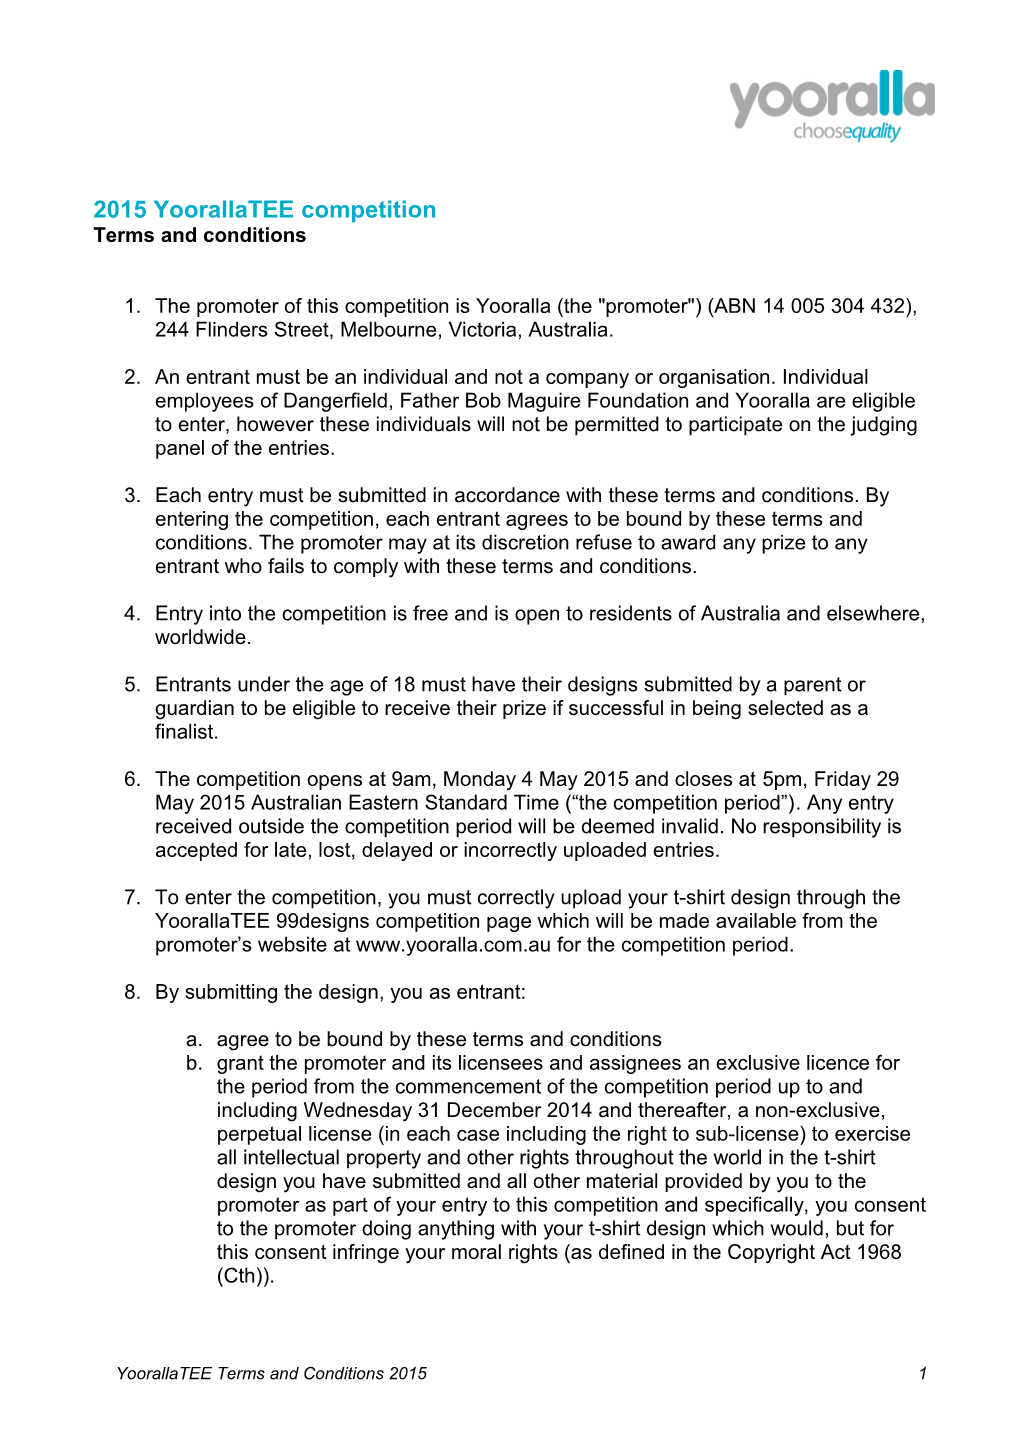 This Document Sets out the Terms of Participation in the Yooralla (Name of Competition)